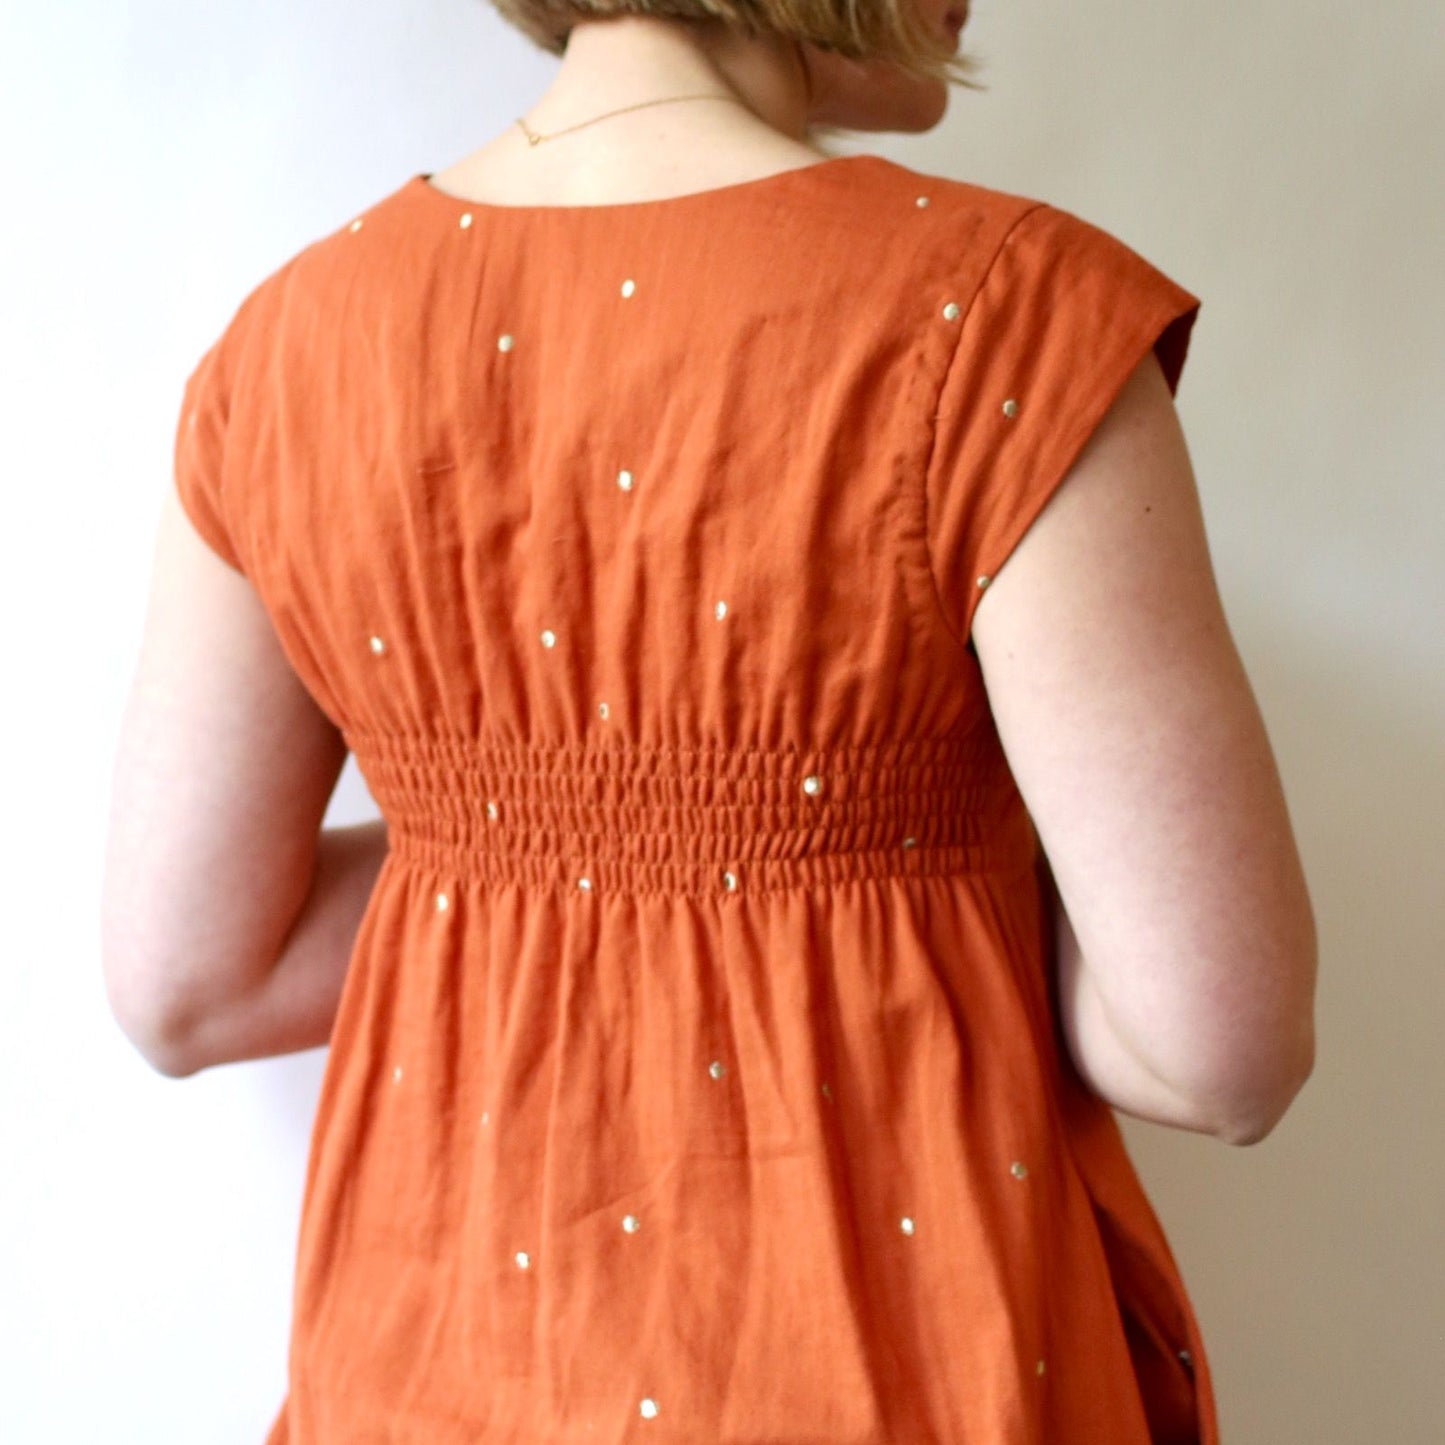 Trillium (formerly Washi) dress and top pattern Made by Rae